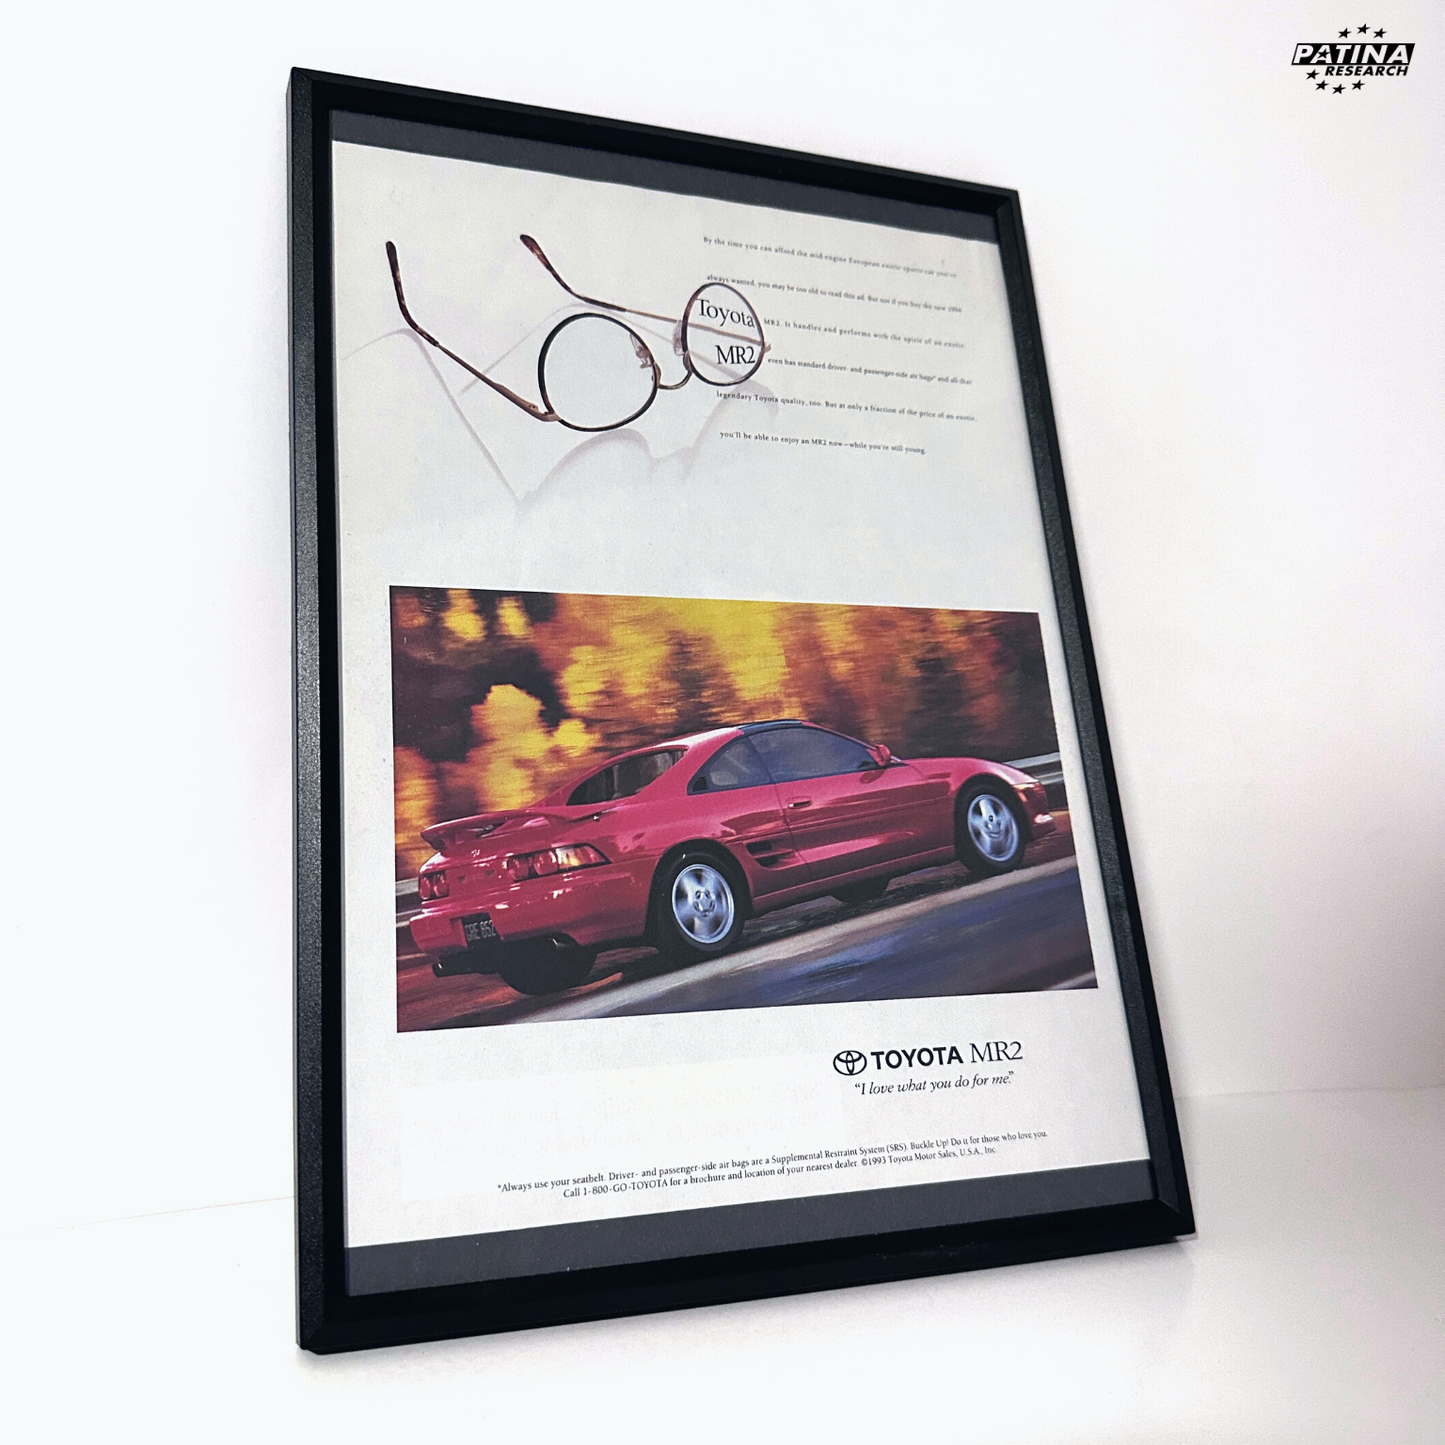 Toyota MR2 love what you do for me framed ad